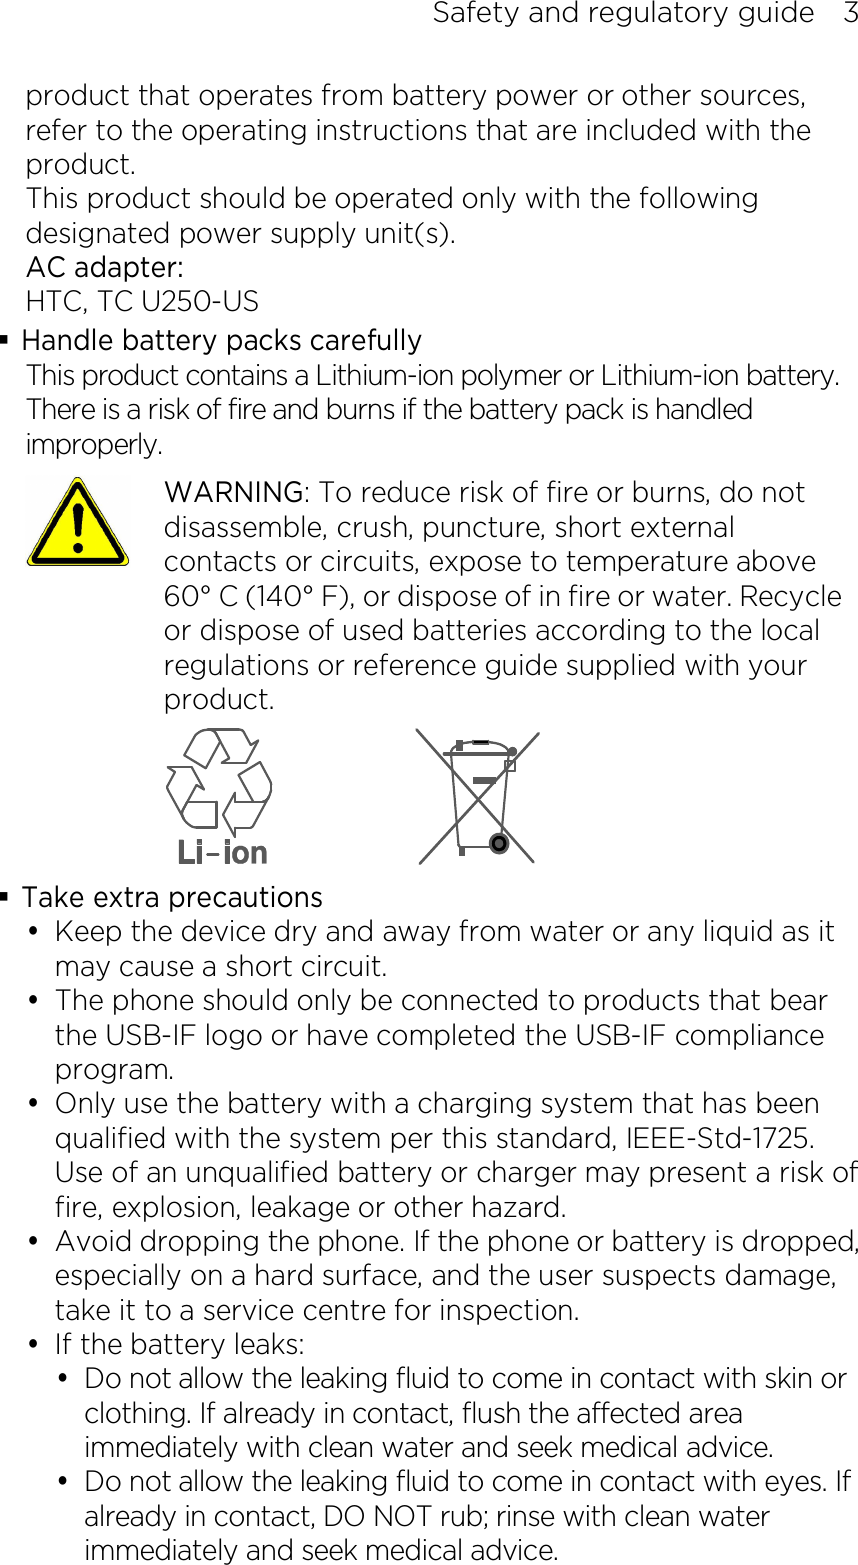 Safety and regulatory guide    3 product that operates from battery power or other sources, refer to the operating instructions that are included with the product. This product should be operated only with the following designated power supply unit(s). AC adapter: HTC, TC U250-US  Handle battery packs carefully This product contains a Lithium-ion polymer or Lithium-ion battery. There is a risk of fire and burns if the battery pack is handled improperly.    WARNING: To reduce risk of fire or burns, do not disassemble, crush, puncture, short external contacts or circuits, expose to temperature above 60° C (140° F), or dispose of in fire or water. Recycle or dispose of used batteries according to the local regulations or reference guide supplied with your product.   Take extra precautions  Keep the device dry and away from water or any liquid as it may cause a short circuit.    The phone should only be connected to products that bear the USB-IF logo or have completed the USB-IF compliance program.  Only use the battery with a charging system that has been qualified with the system per this standard, IEEE-Std-1725. Use of an unqualified battery or charger may present a risk of fire, explosion, leakage or other hazard.  Avoid dropping the phone. If the phone or battery is dropped, especially on a hard surface, and the user suspects damage, take it to a service centre for inspection.  If the battery leaks:    Do not allow the leaking fluid to come in contact with skin or clothing. If already in contact, flush the affected area immediately with clean water and seek medical advice.    Do not allow the leaking fluid to come in contact with eyes. If already in contact, DO NOT rub; rinse with clean water immediately and seek medical advice.   